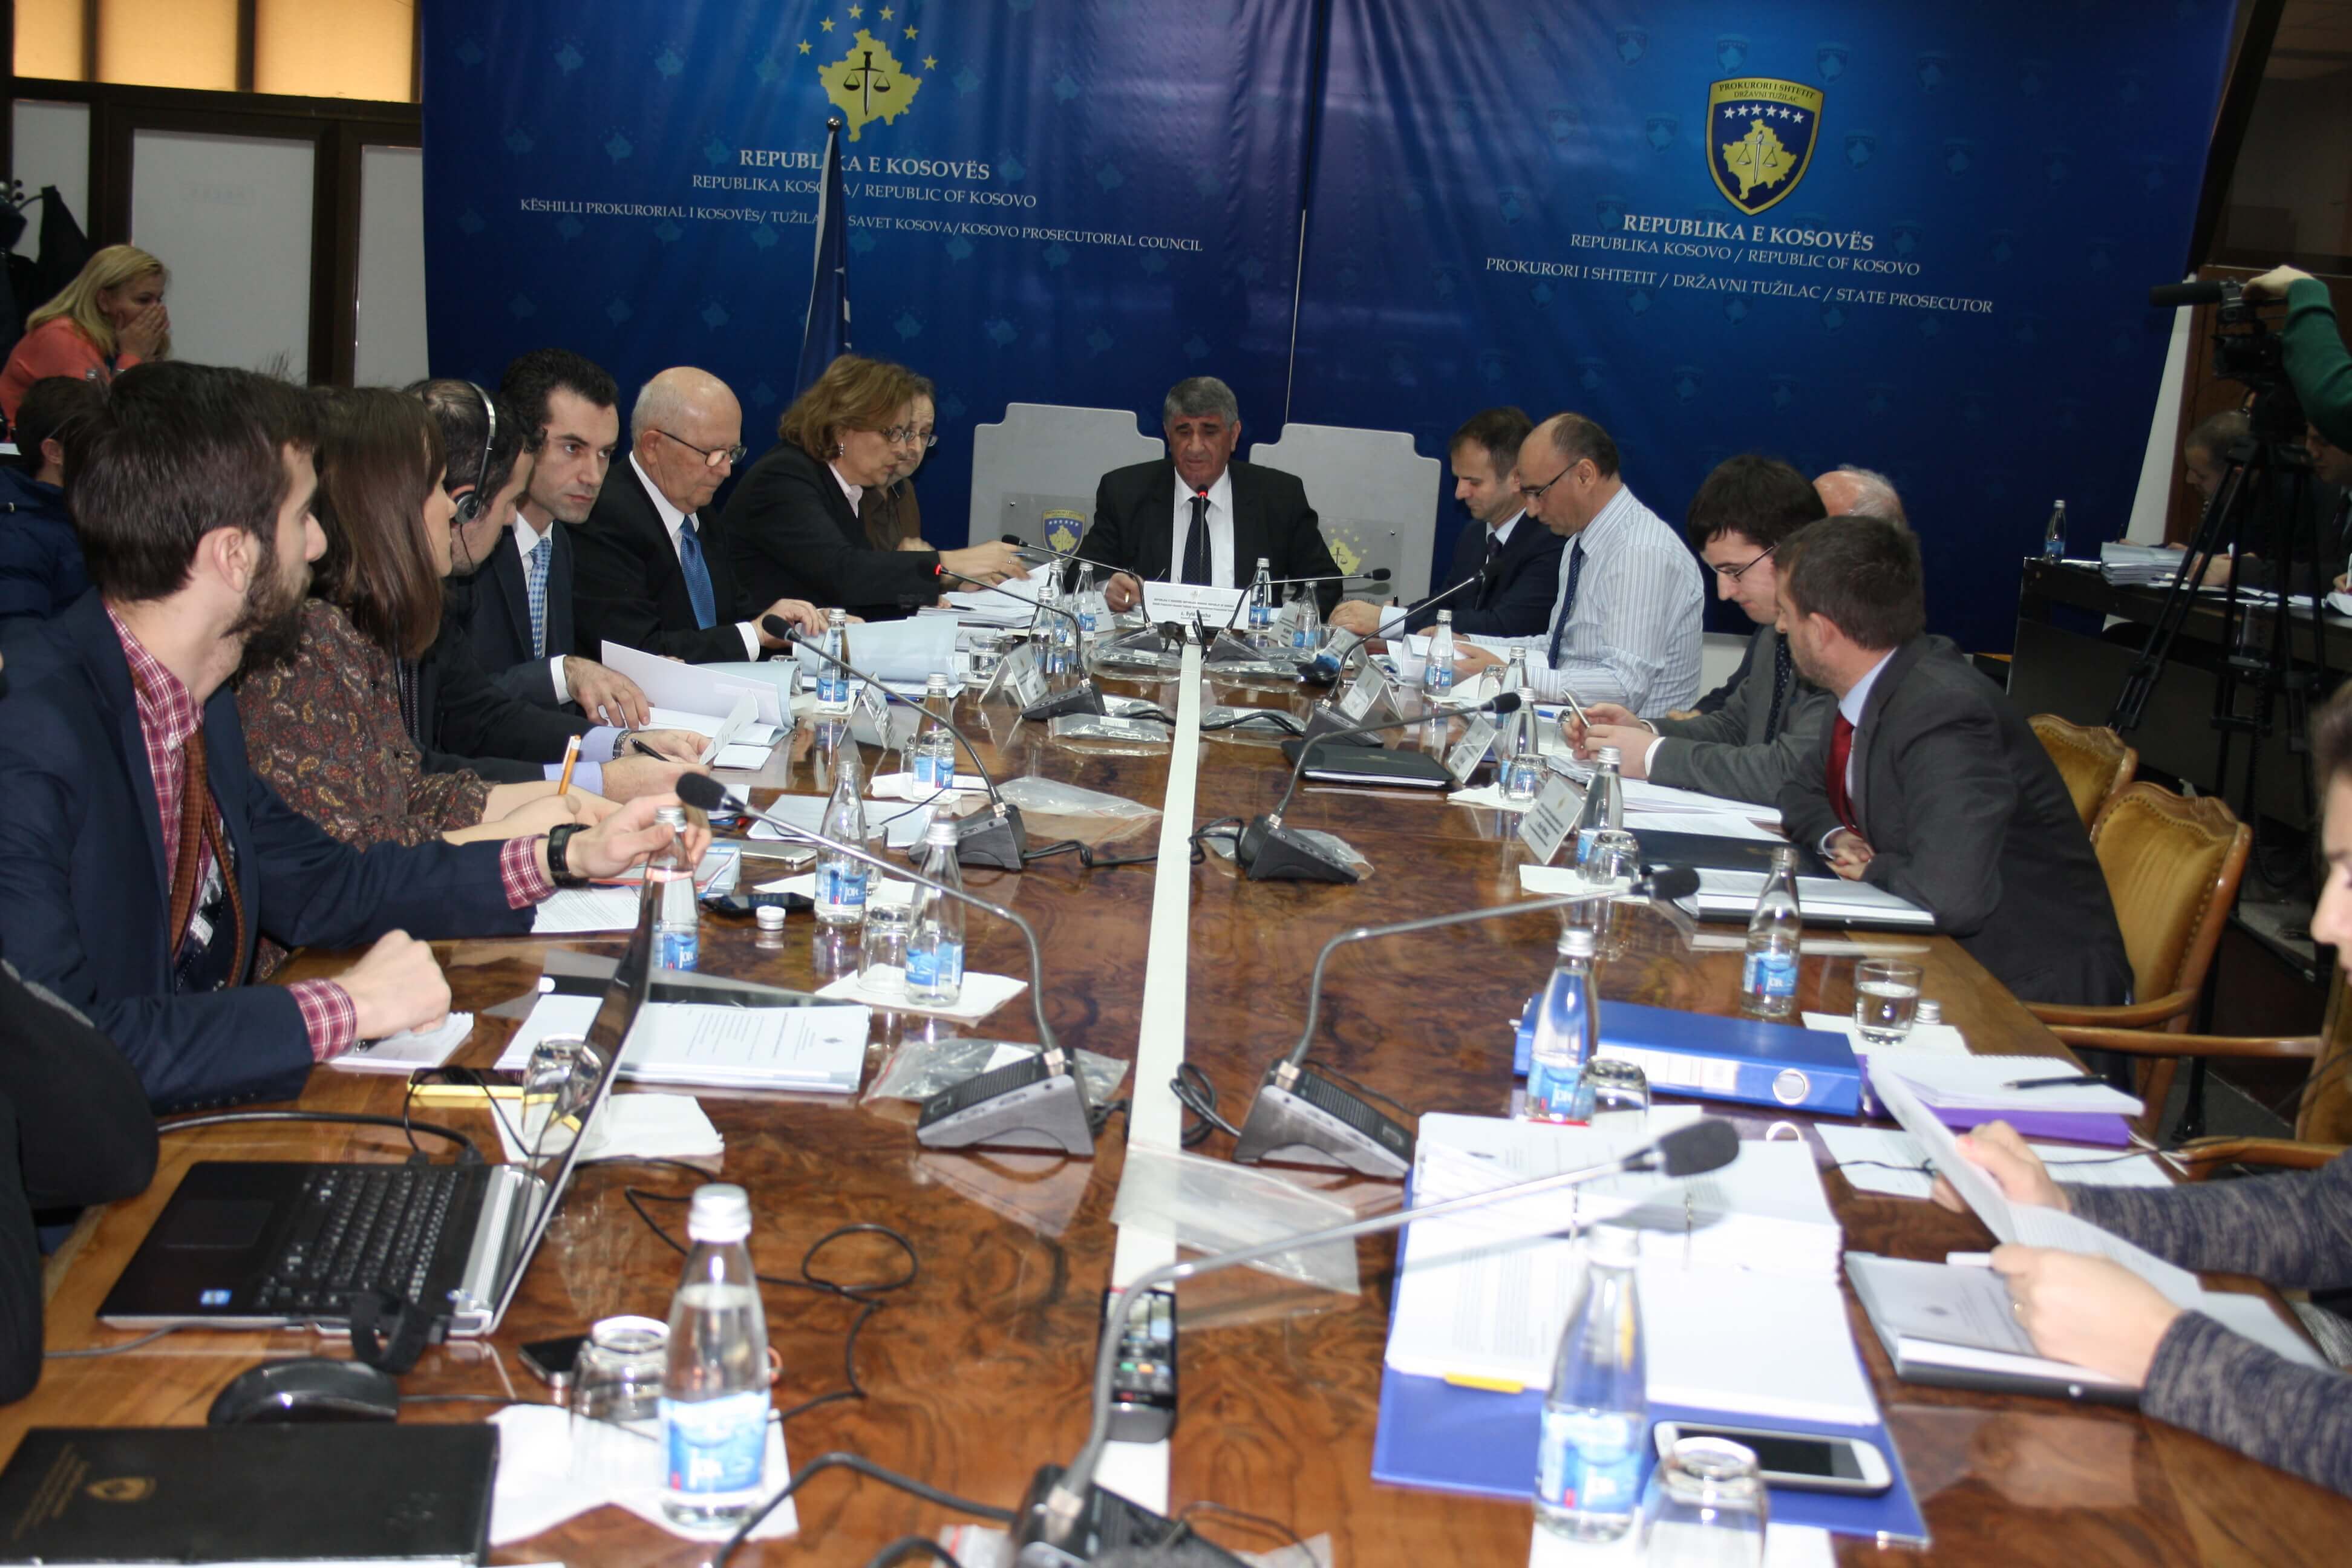 NEXT MEETING OF KOSOVO PROSECUTORIAL COUNCIL IS HELD